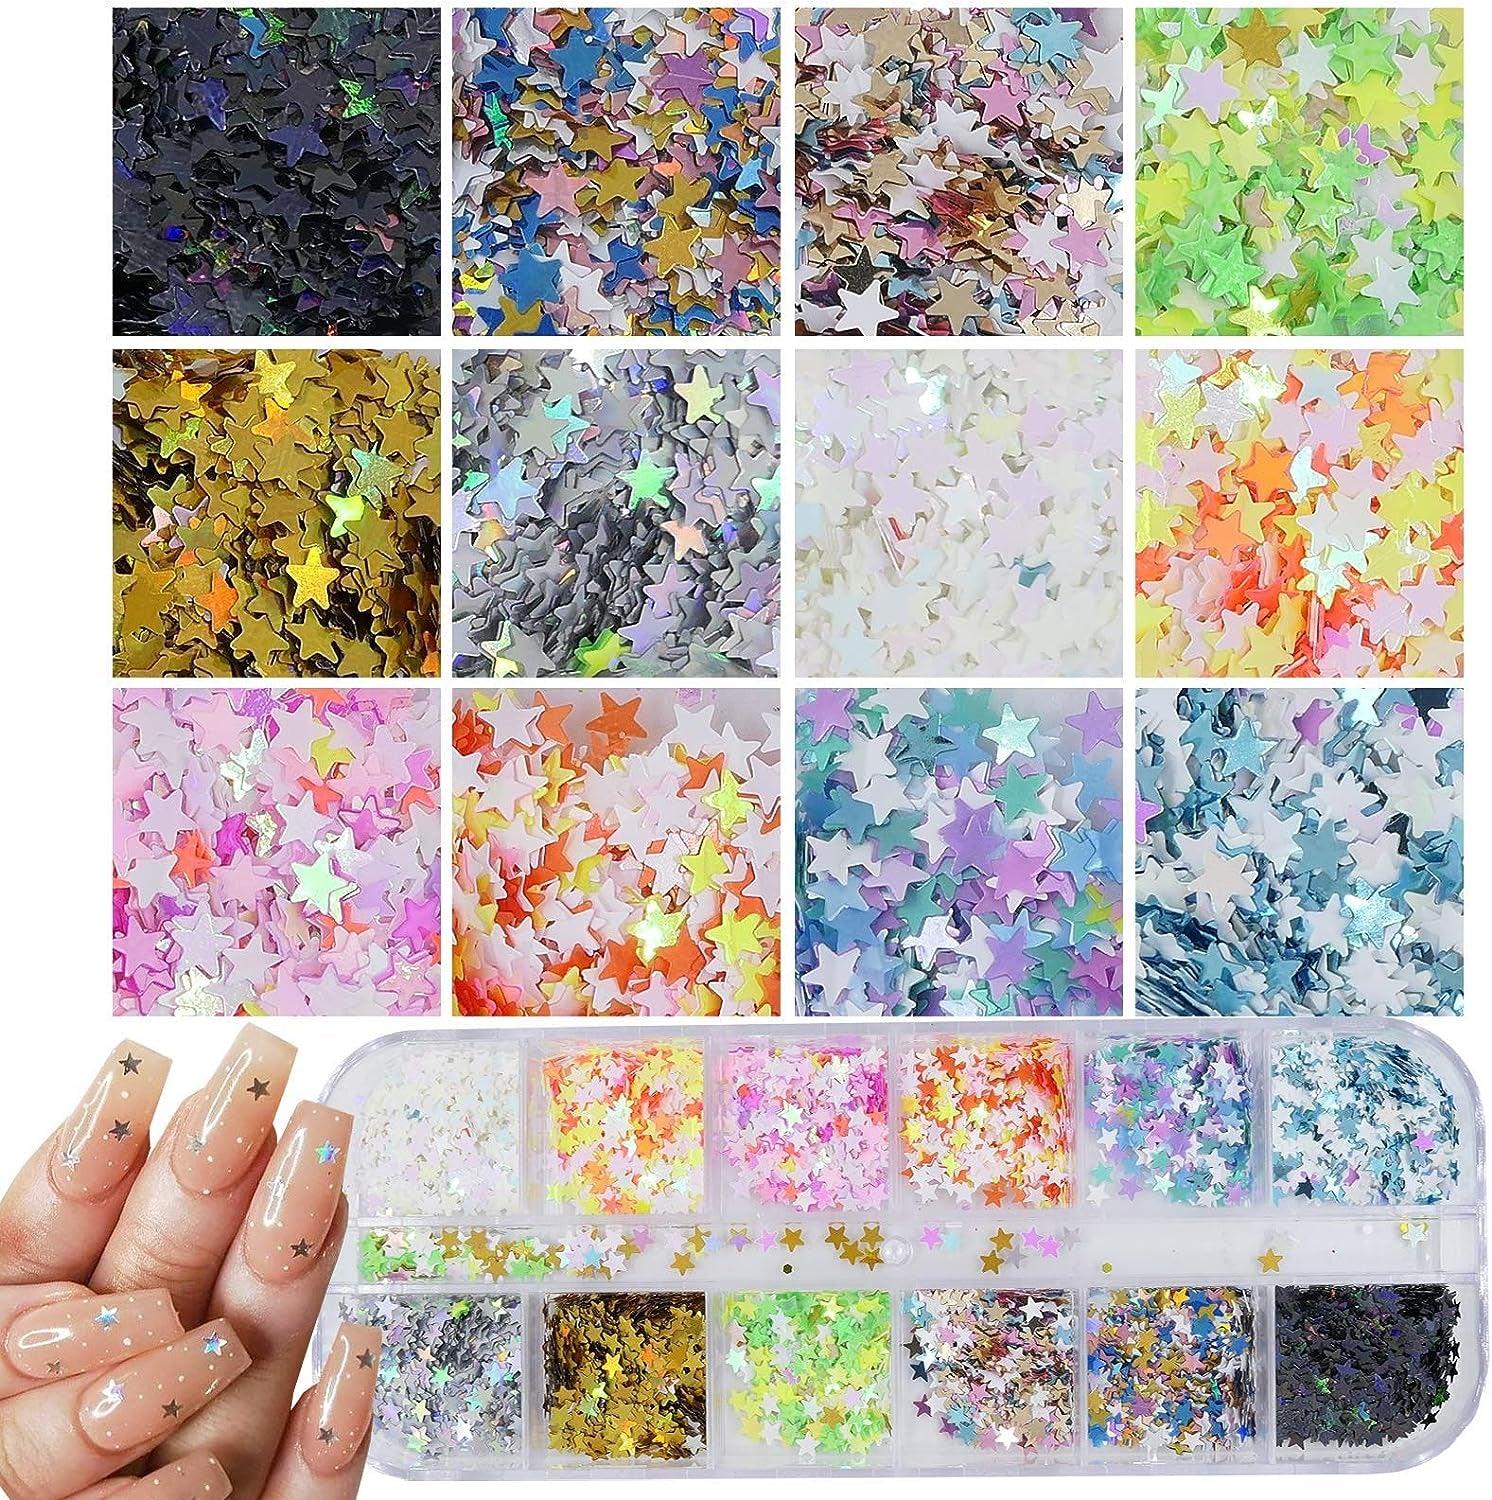 4 Boxes Holographic Nail Sequins Shapes Mixed Iridescent Nail Glitter Flakes Butterfly Hearts Star DIY Design Manicure Decorations Sets for Nail Art/Craft/Makeup - WoodArtSupply